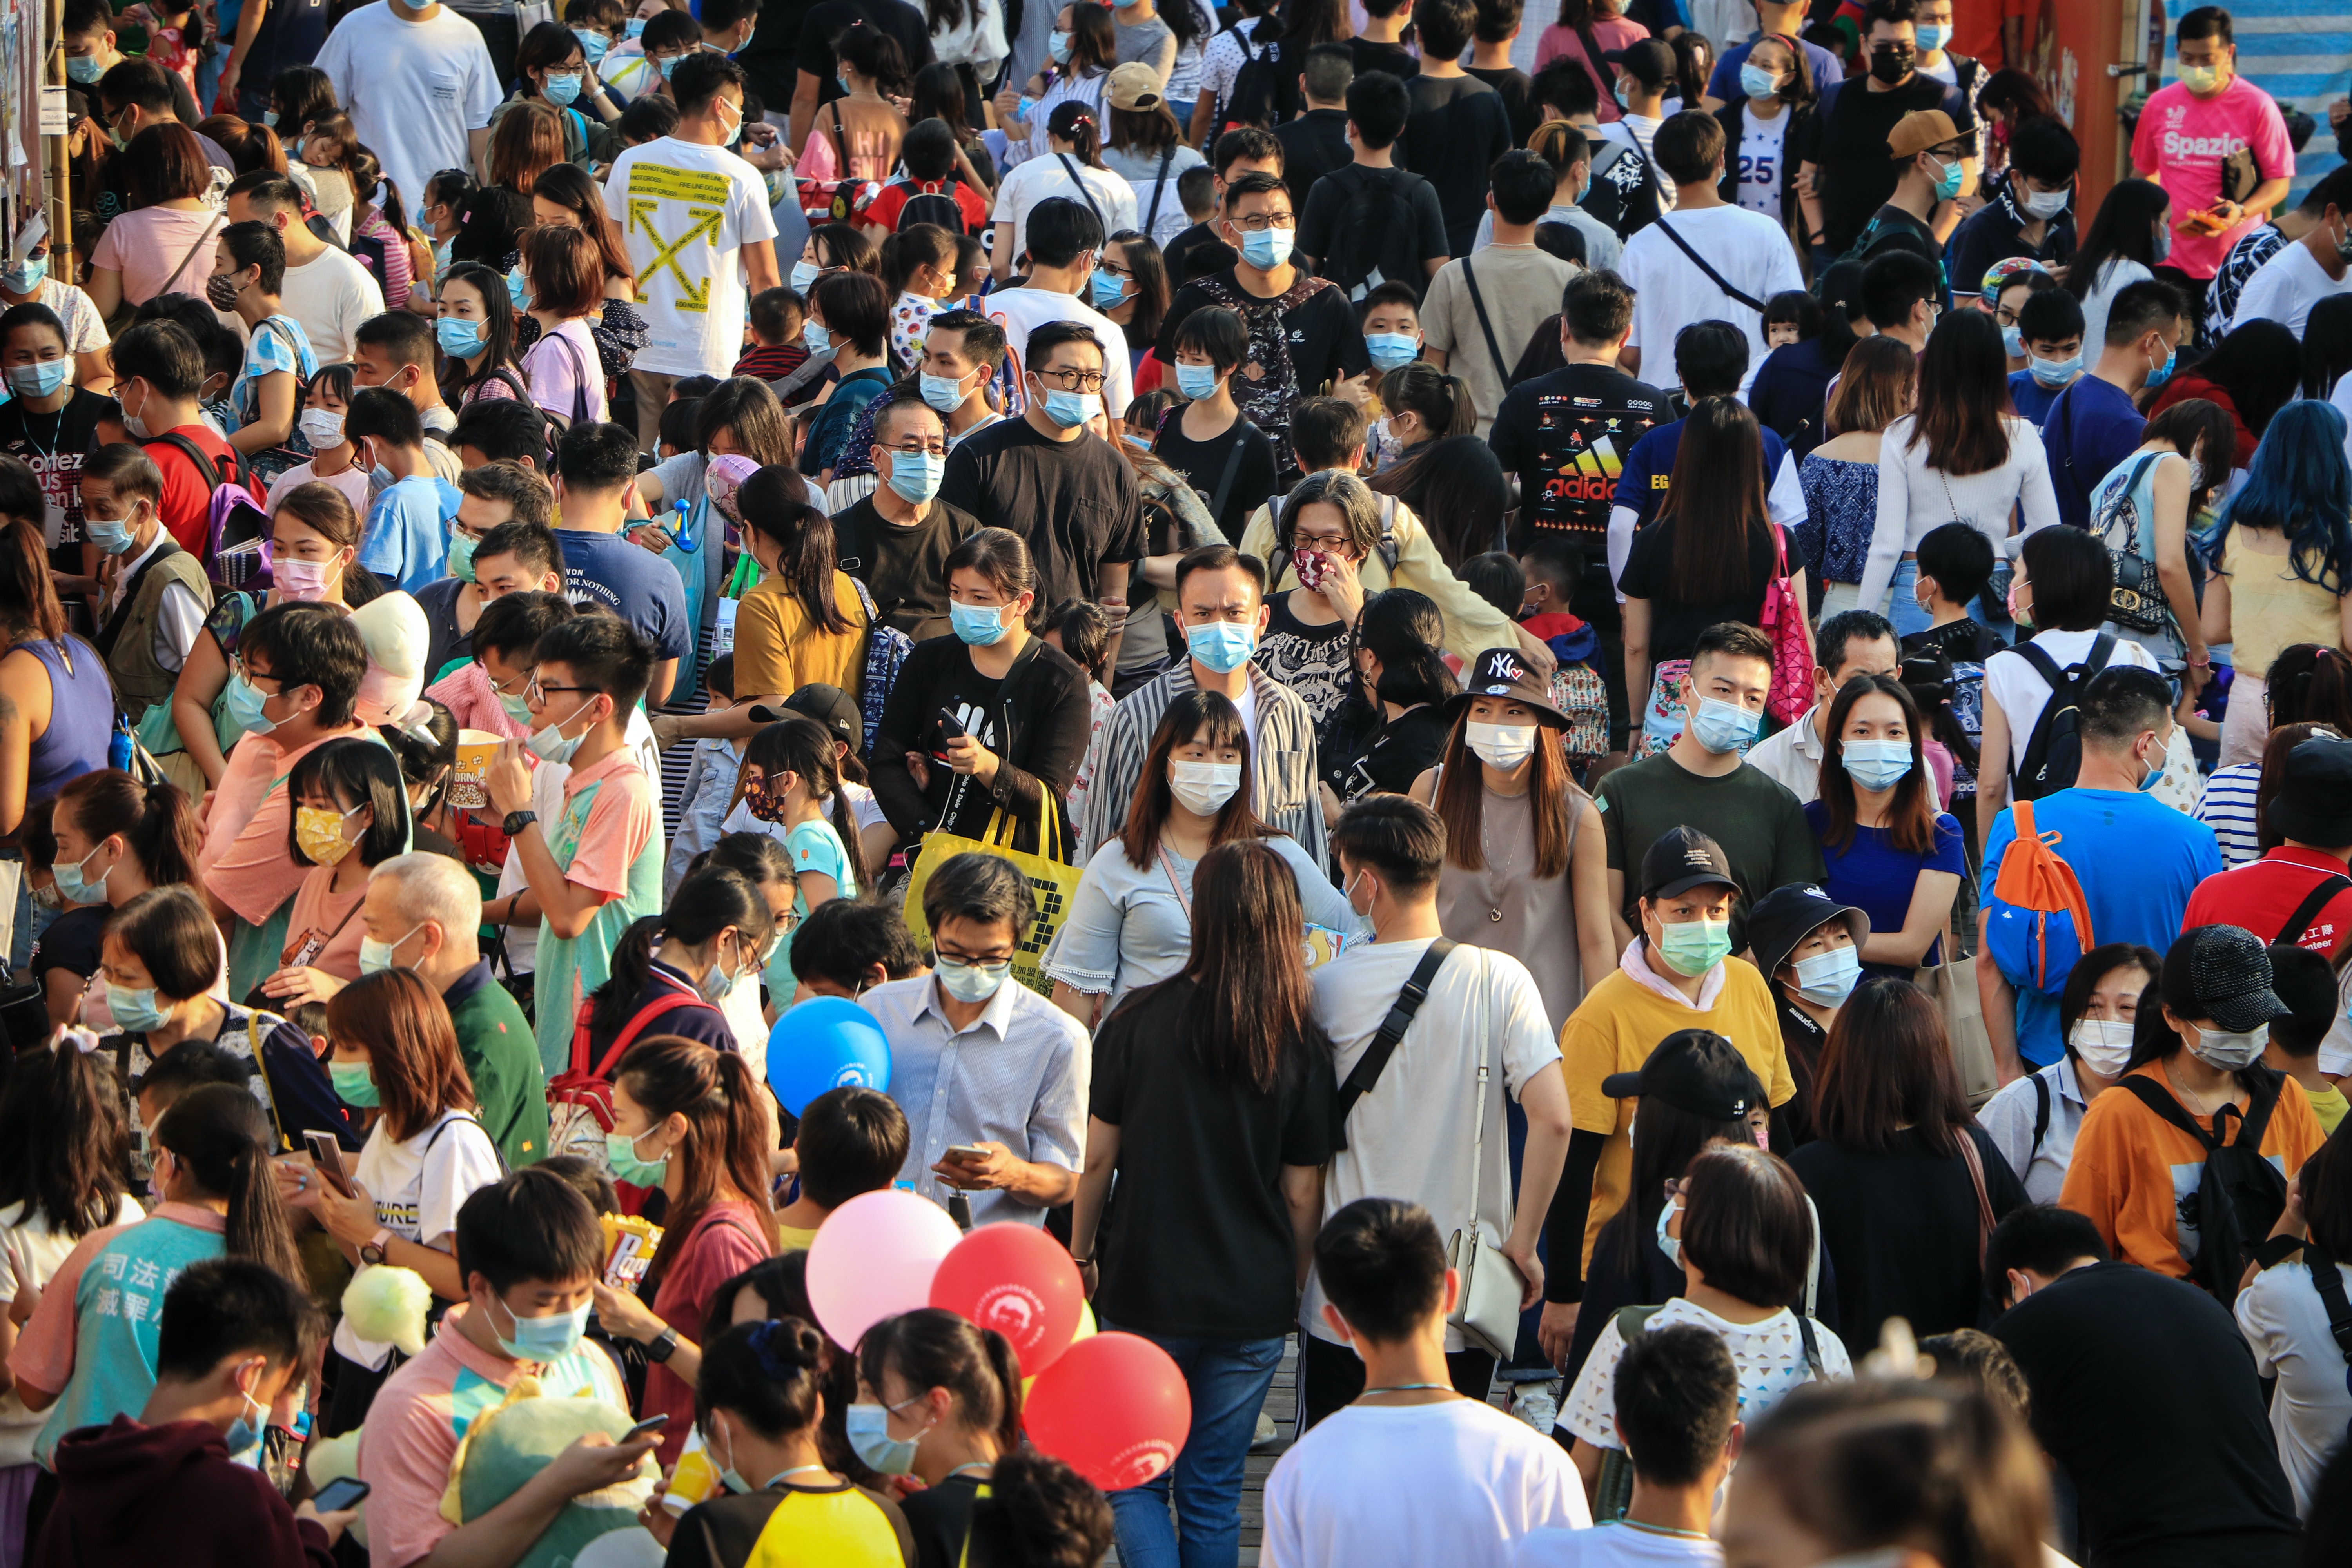 Photo of many people walking in a crowd.